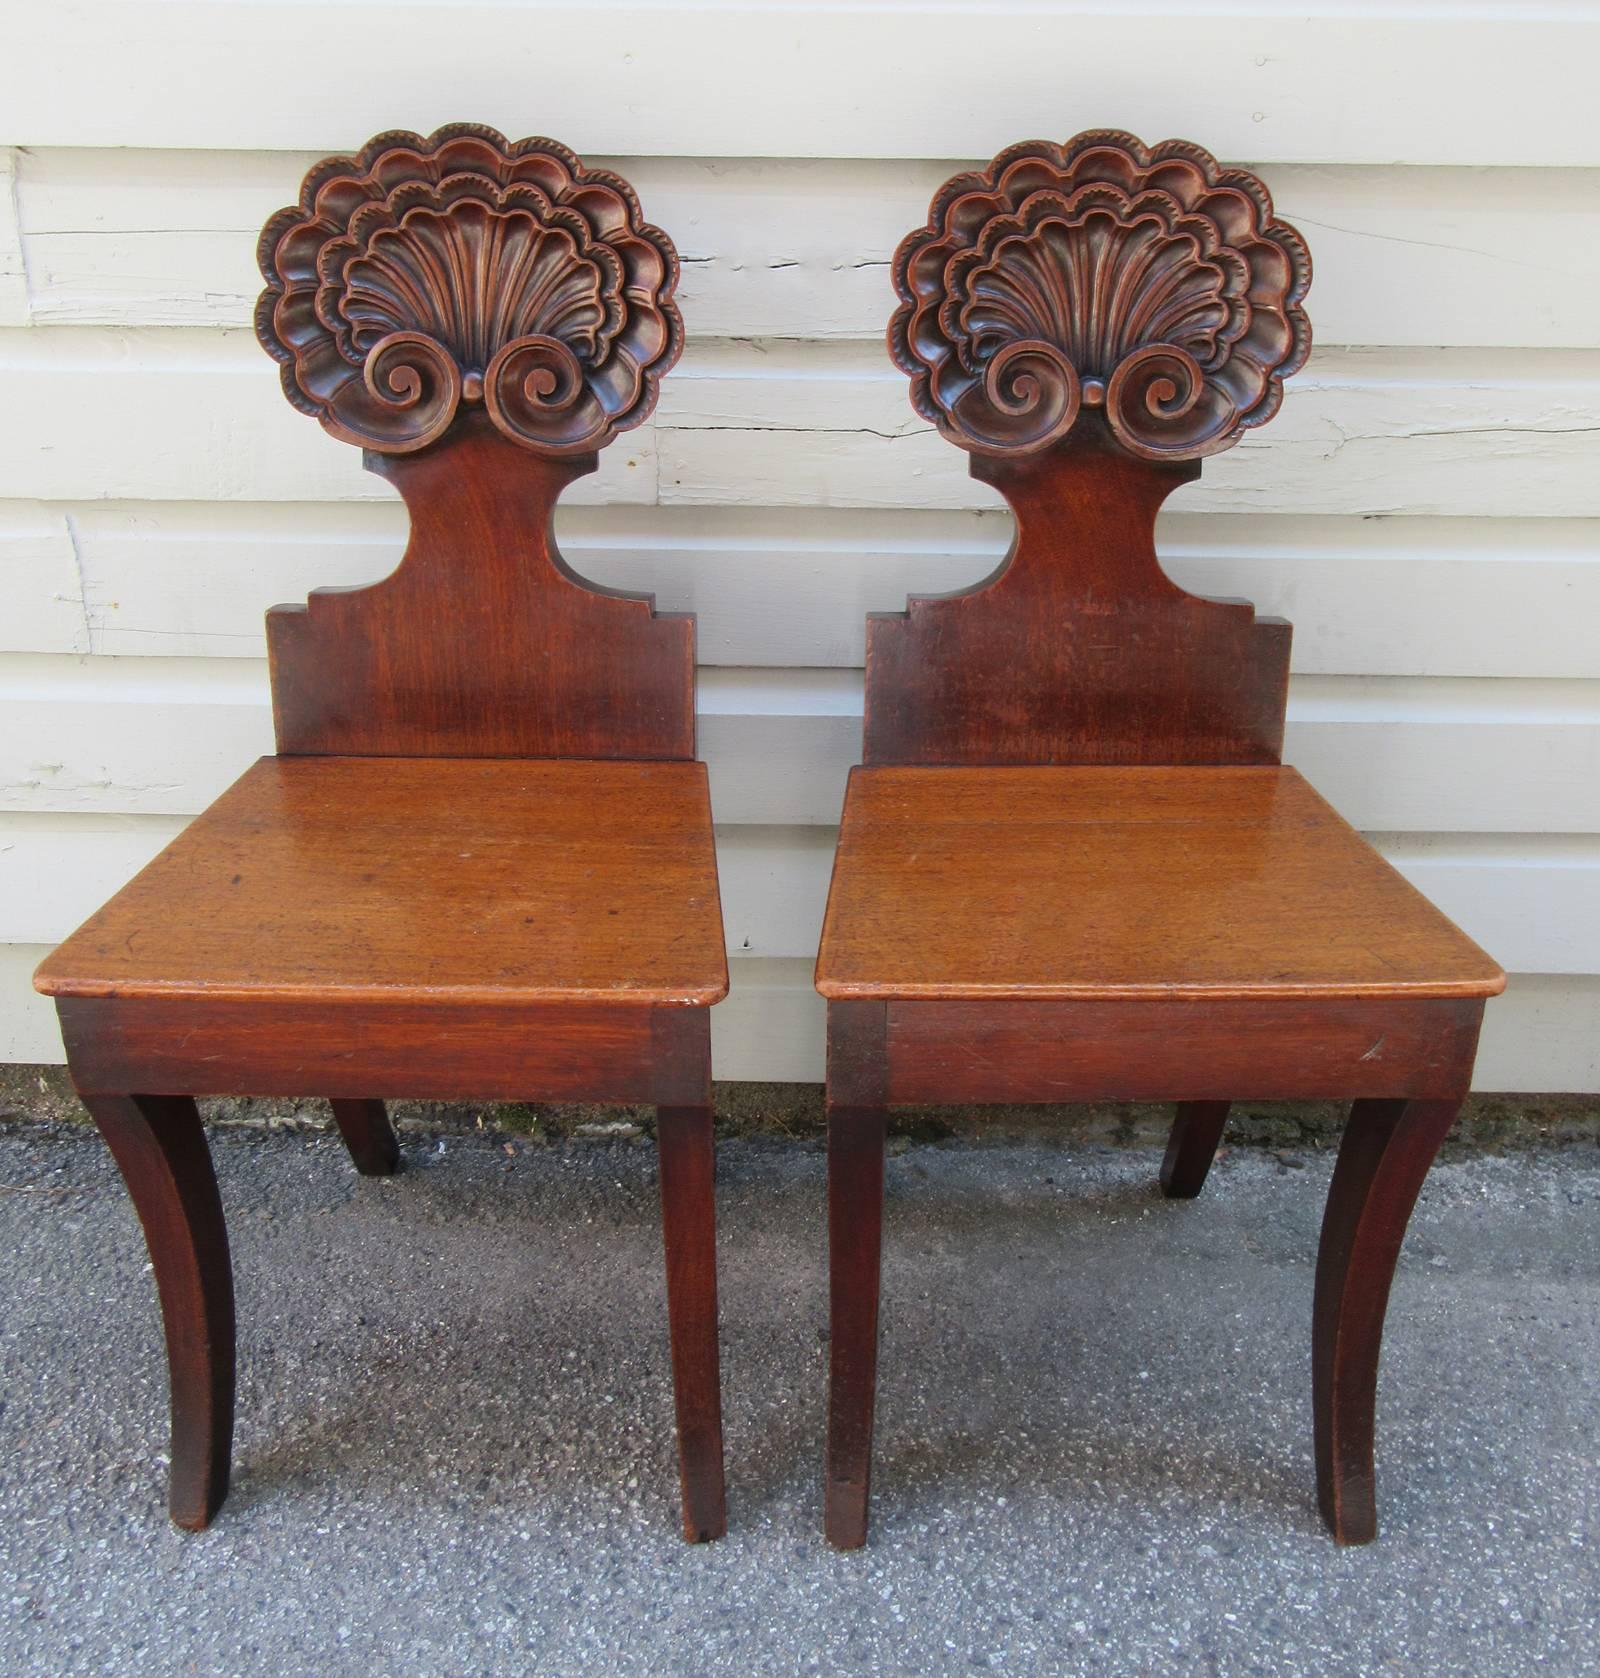 Hand-Carved Early 19th Century English William IV Mahogany Hall Chairs Attributed to Gillows